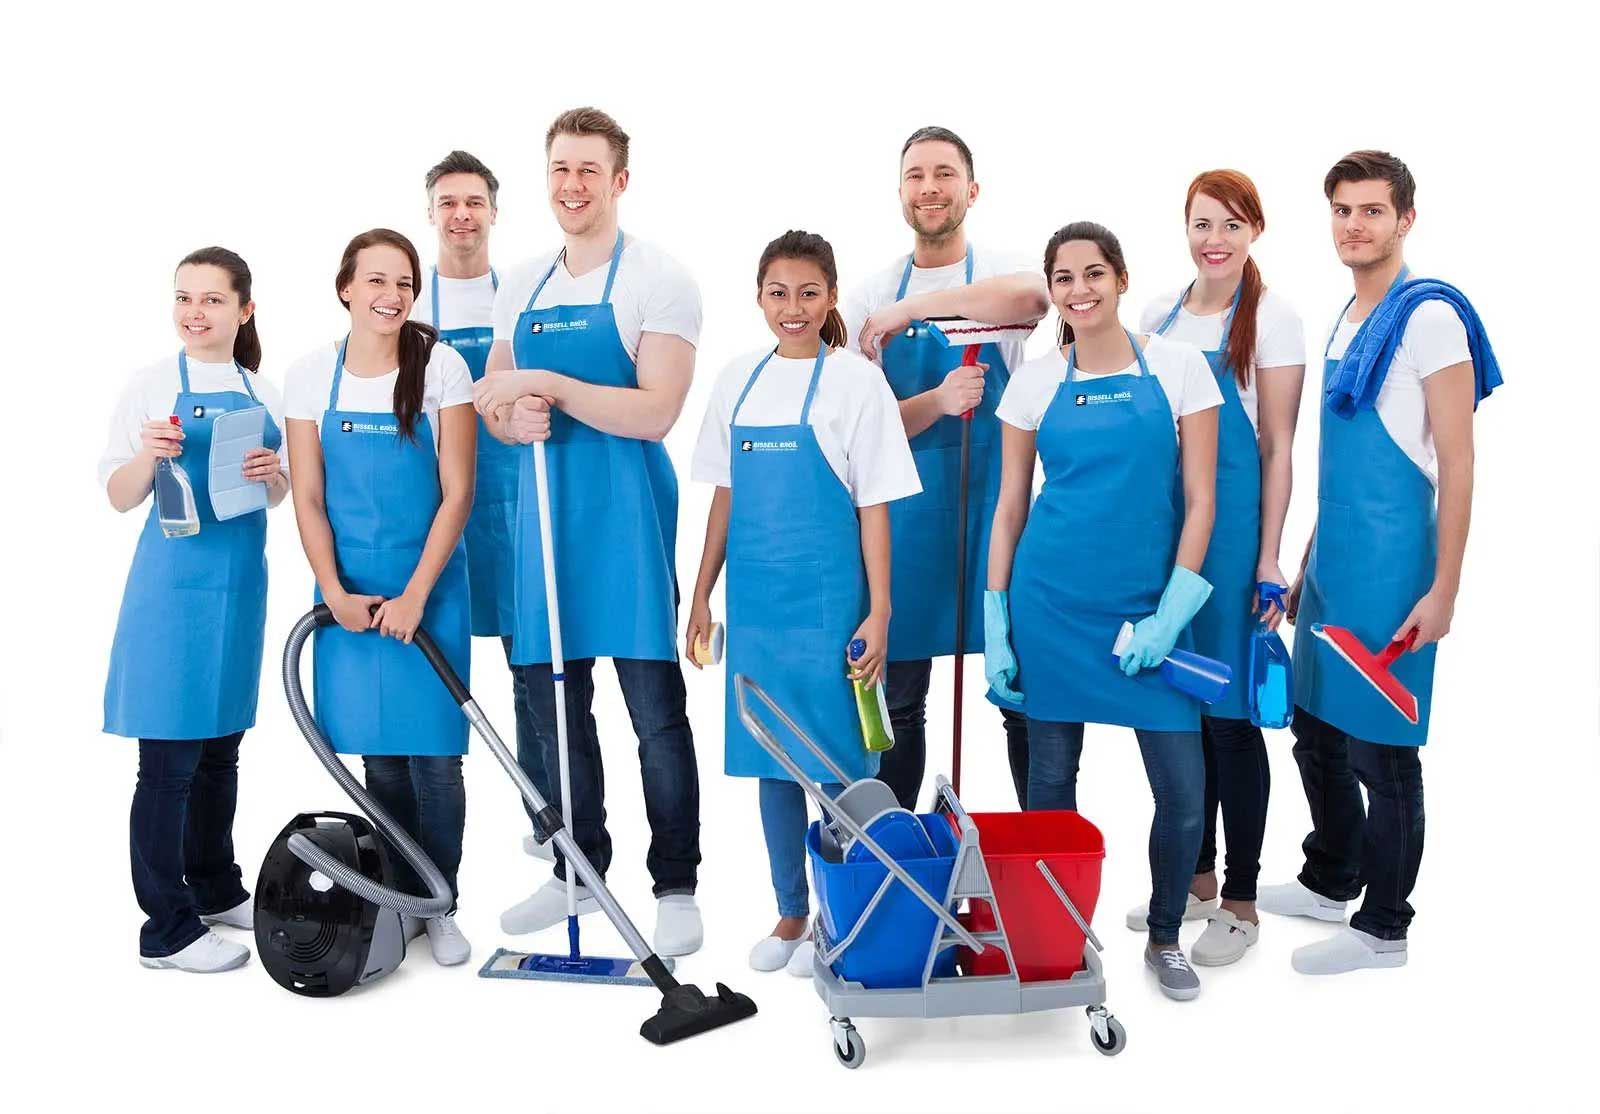 Cleaning team Referral Program For My Cleaning Business